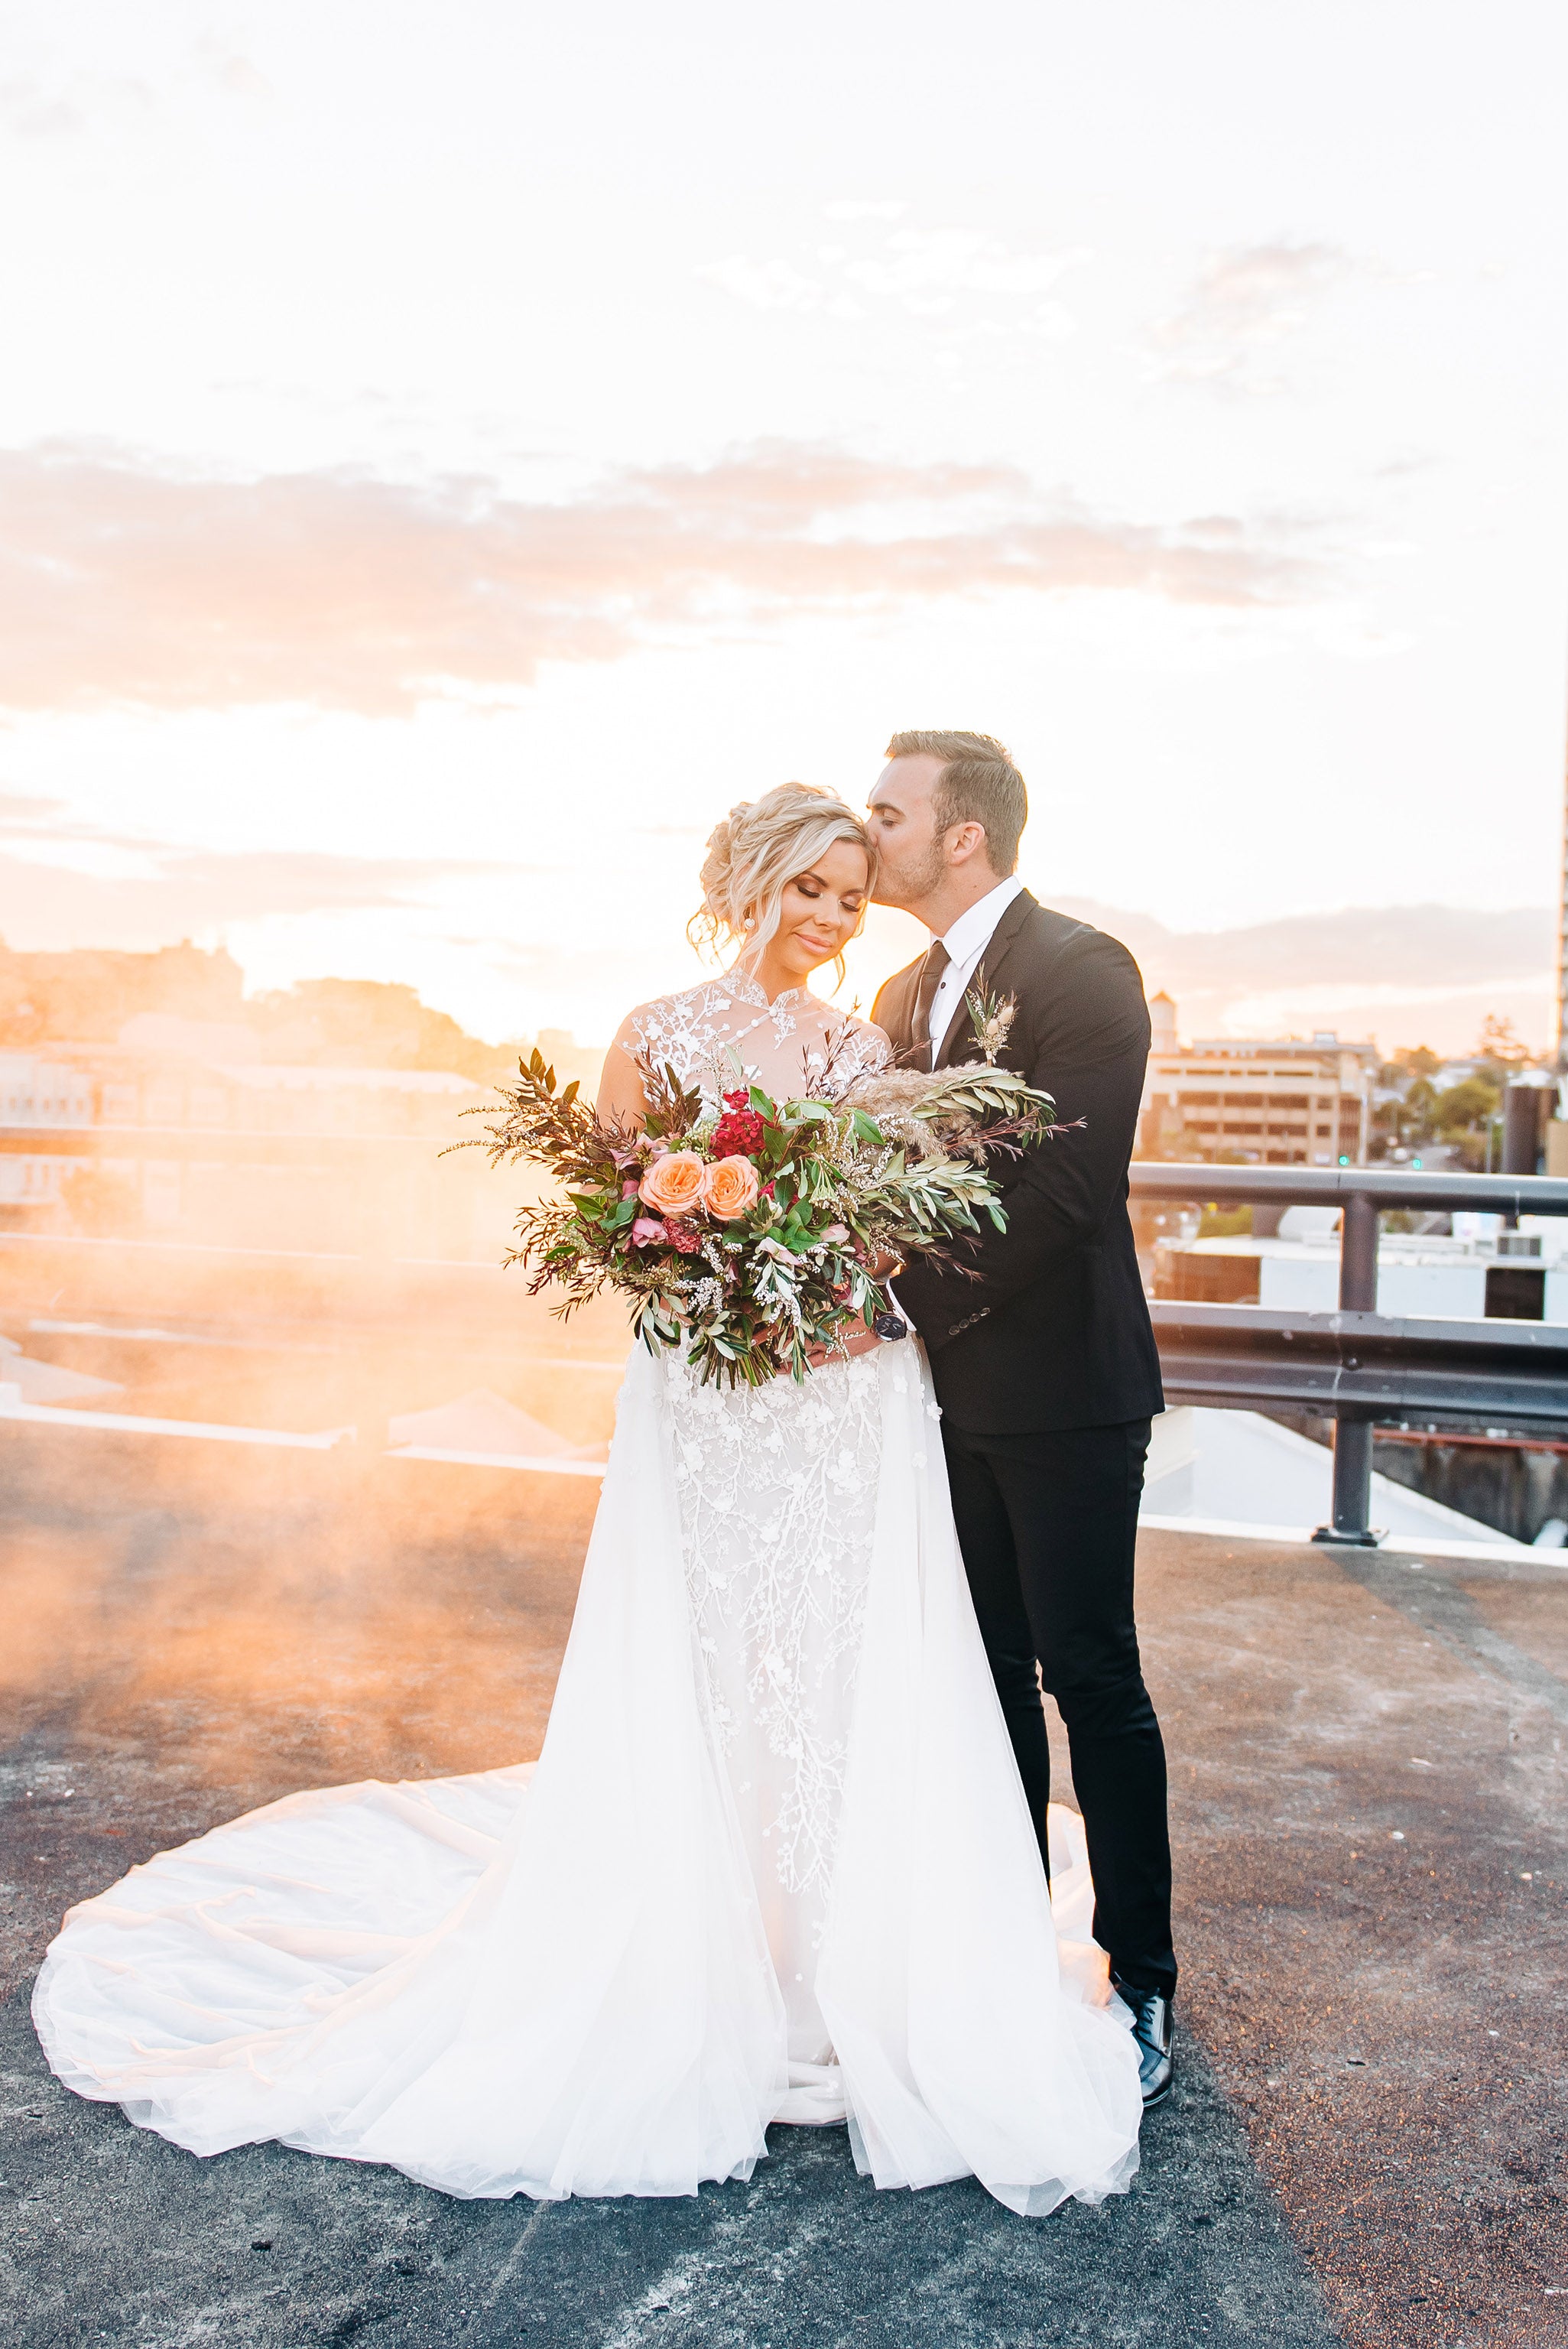 couple hugging holding flowers in wedding attire on rooftop at sunset